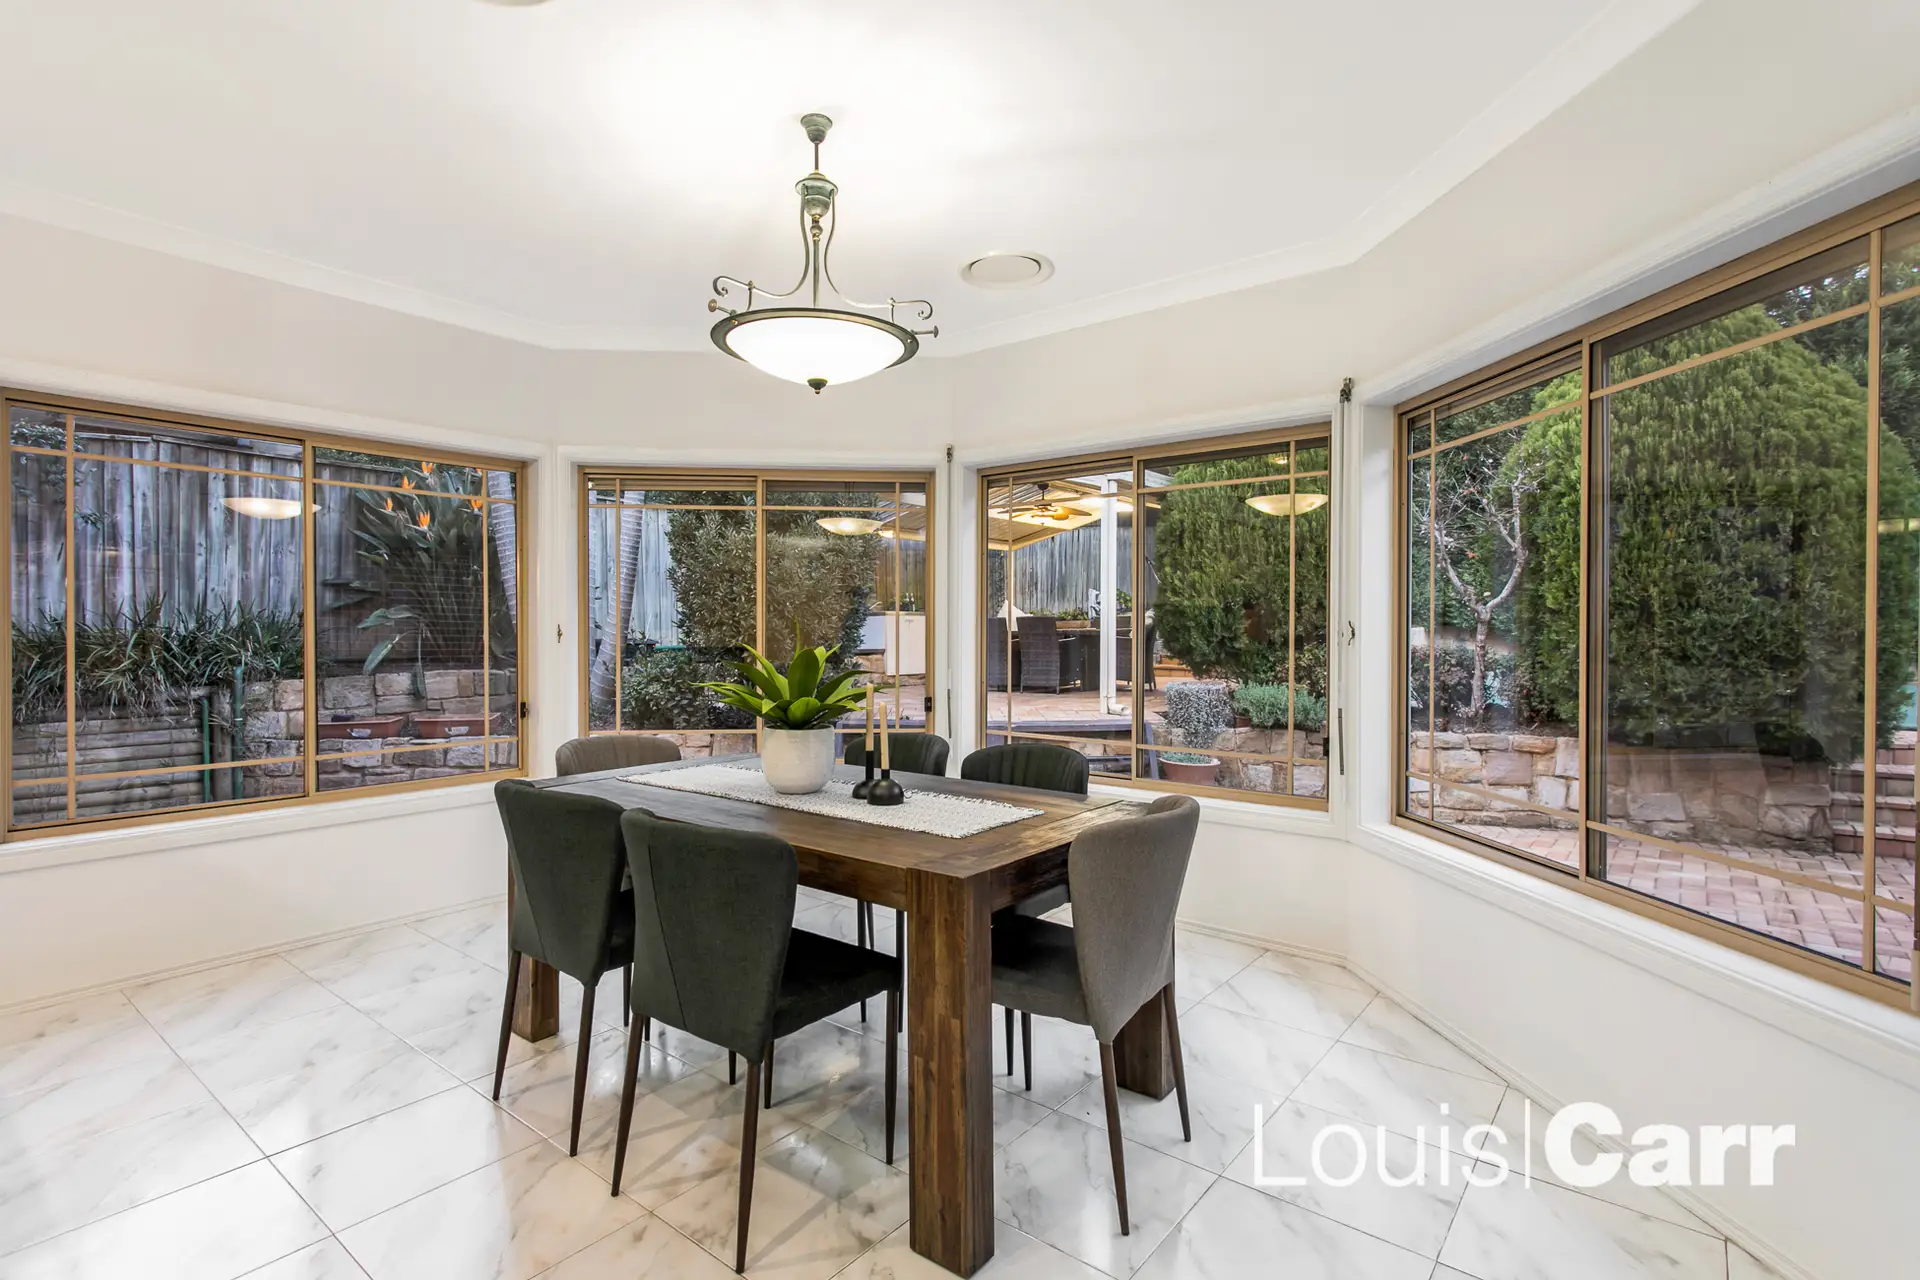 Photo #5: 5 Avonleigh Way, West Pennant Hills - Sold by Louis Carr Real Estate